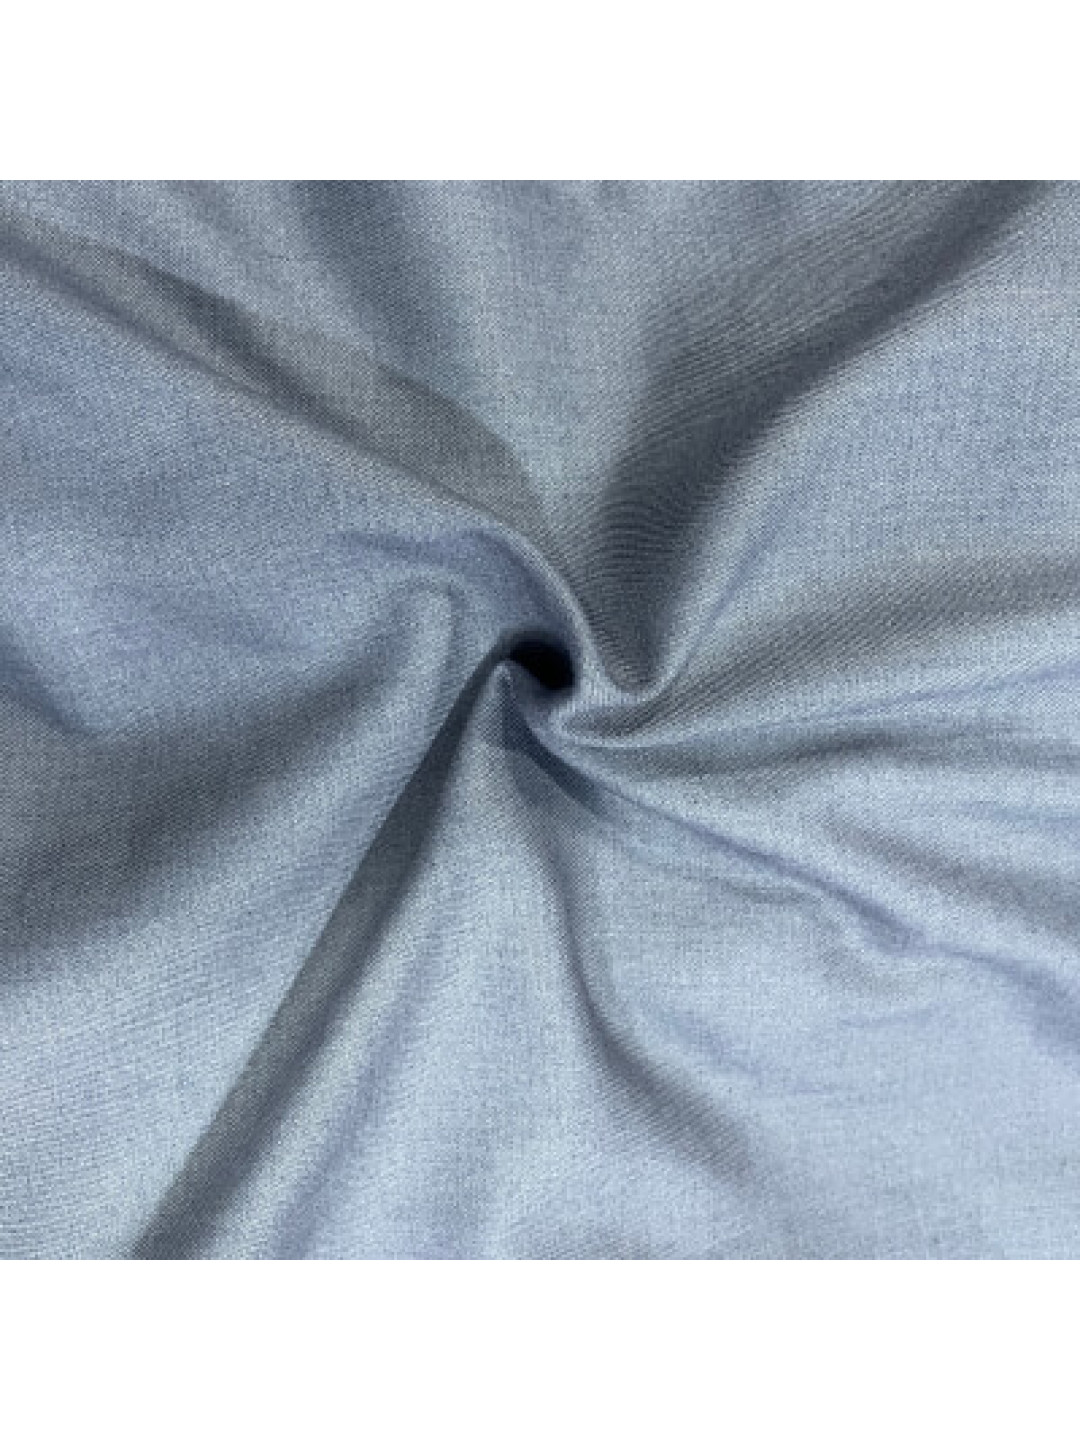 Lightweight Wholesale italian linen fabric For Clothing And More 